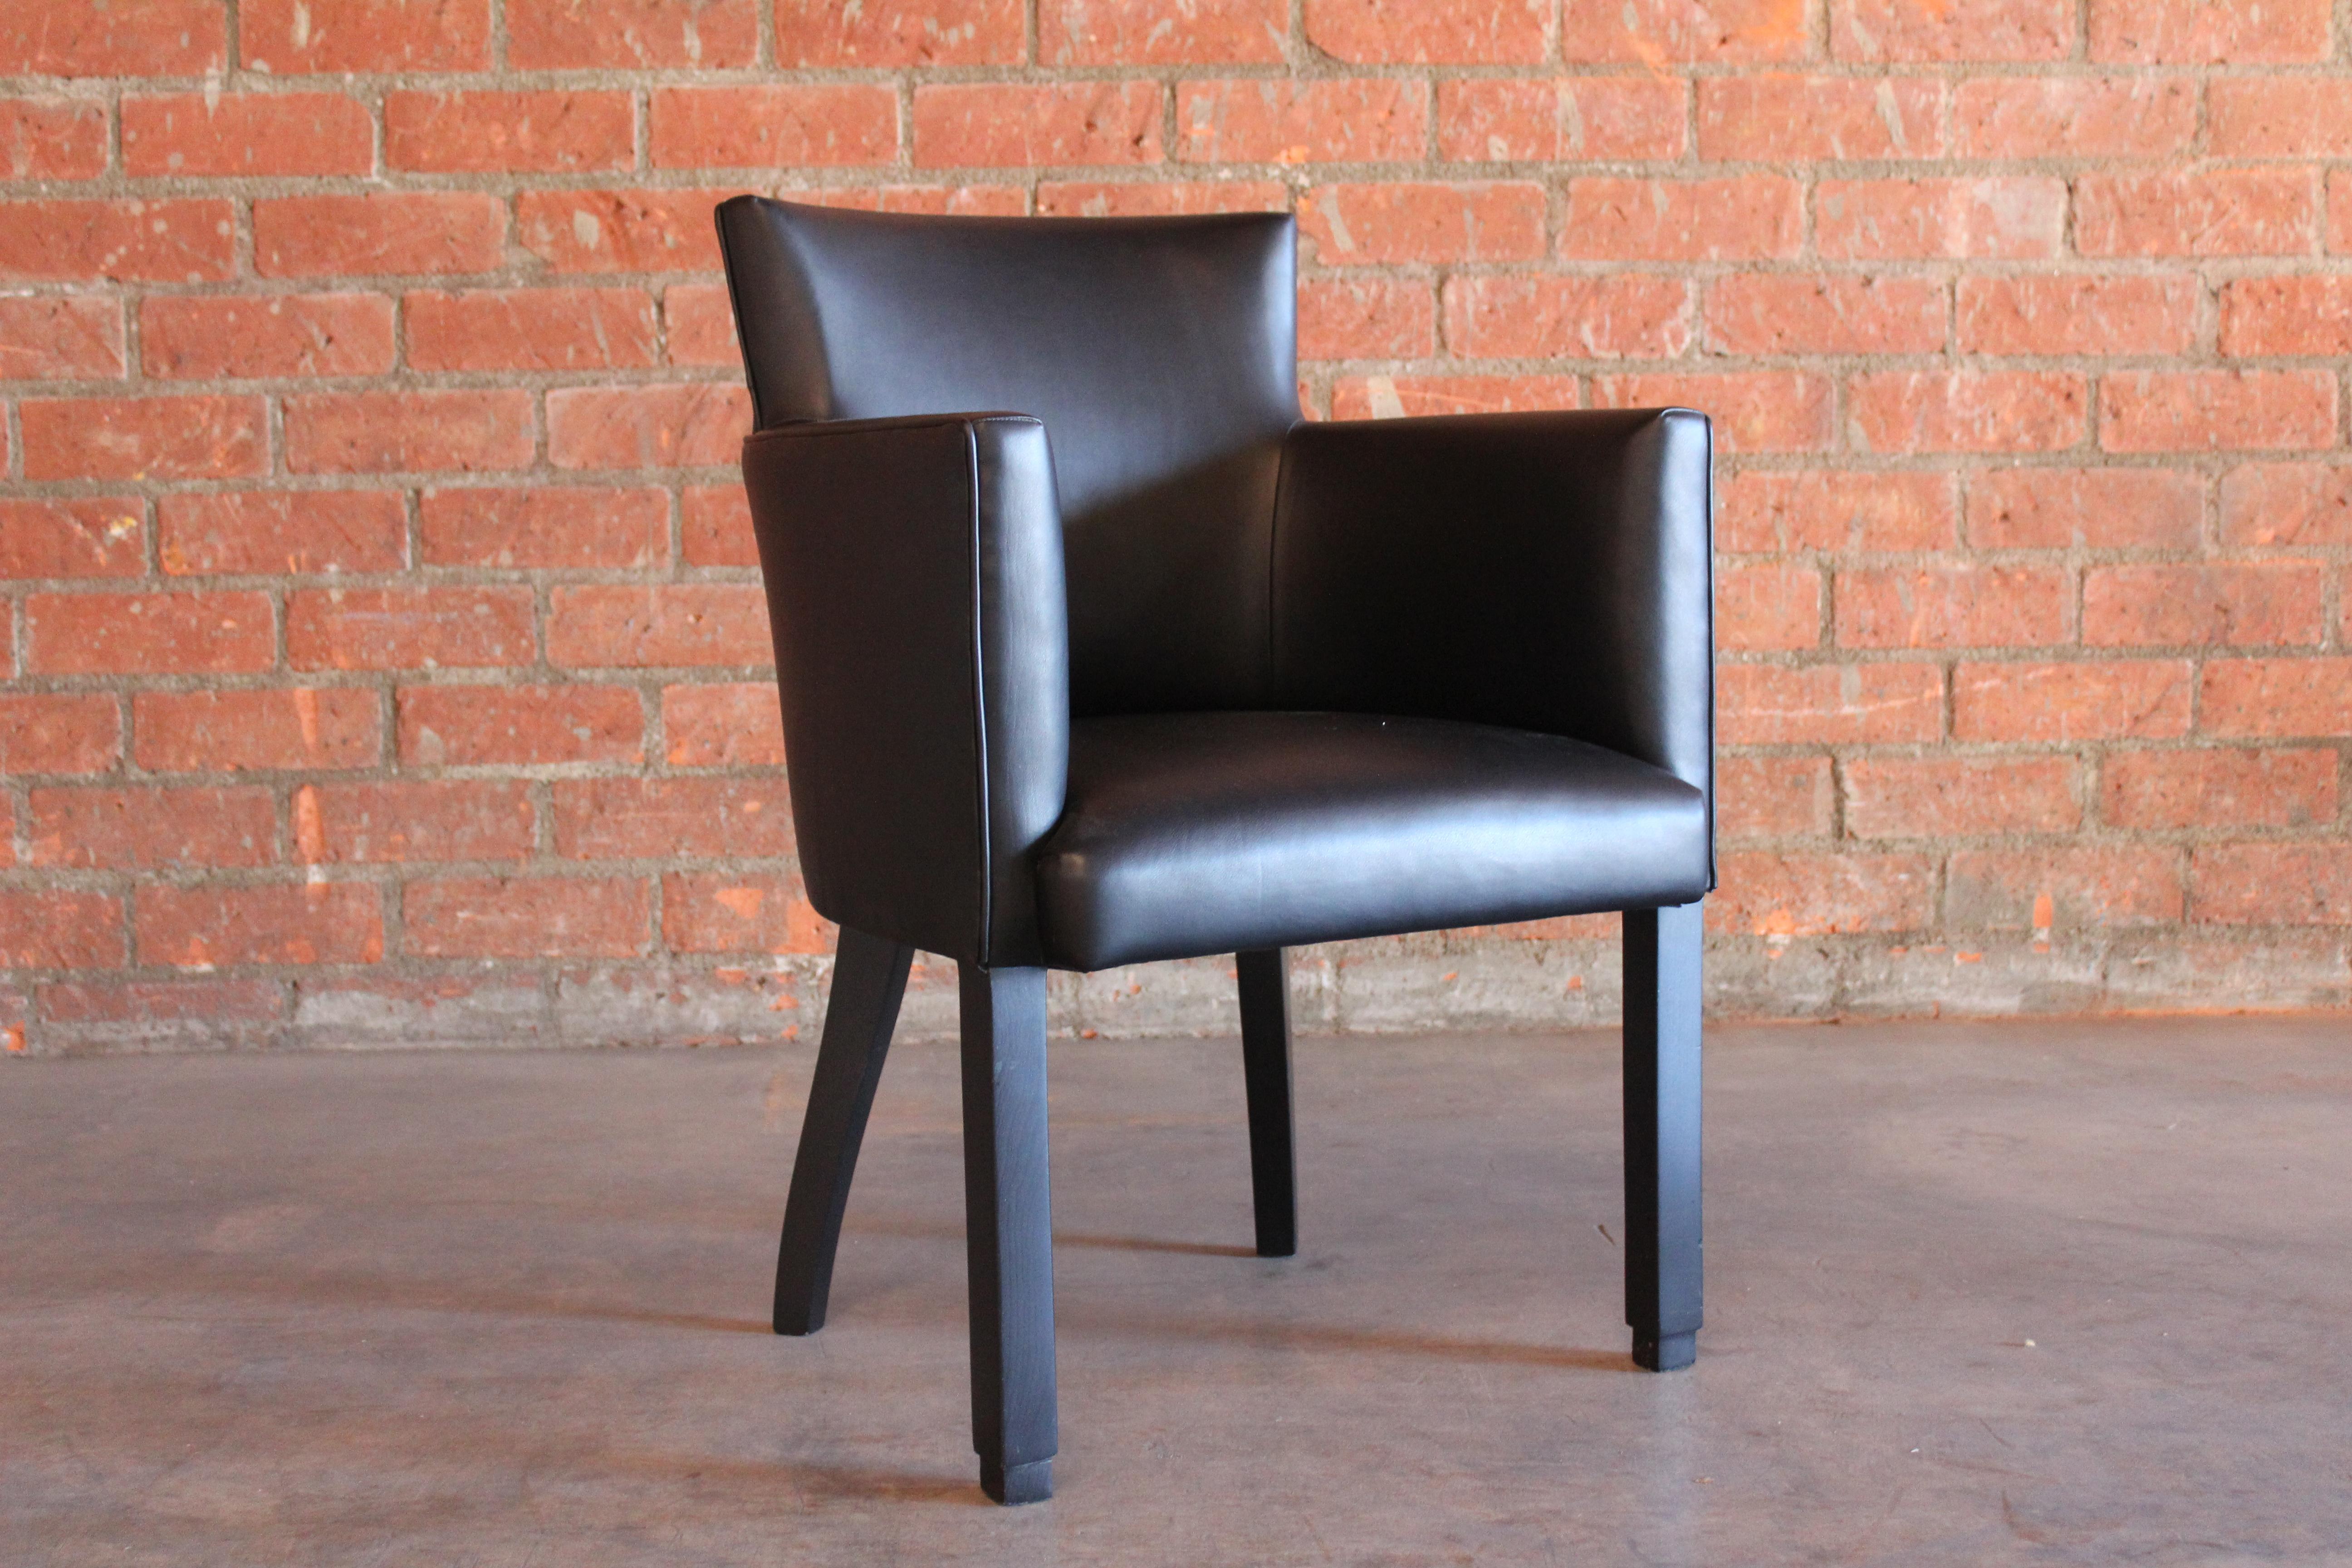 Vintage 1930s armchair in the manner of Jacques Adnet. Newly upholstered in genuine black leather. Wooden legs in a satin black finish. Measure: 26